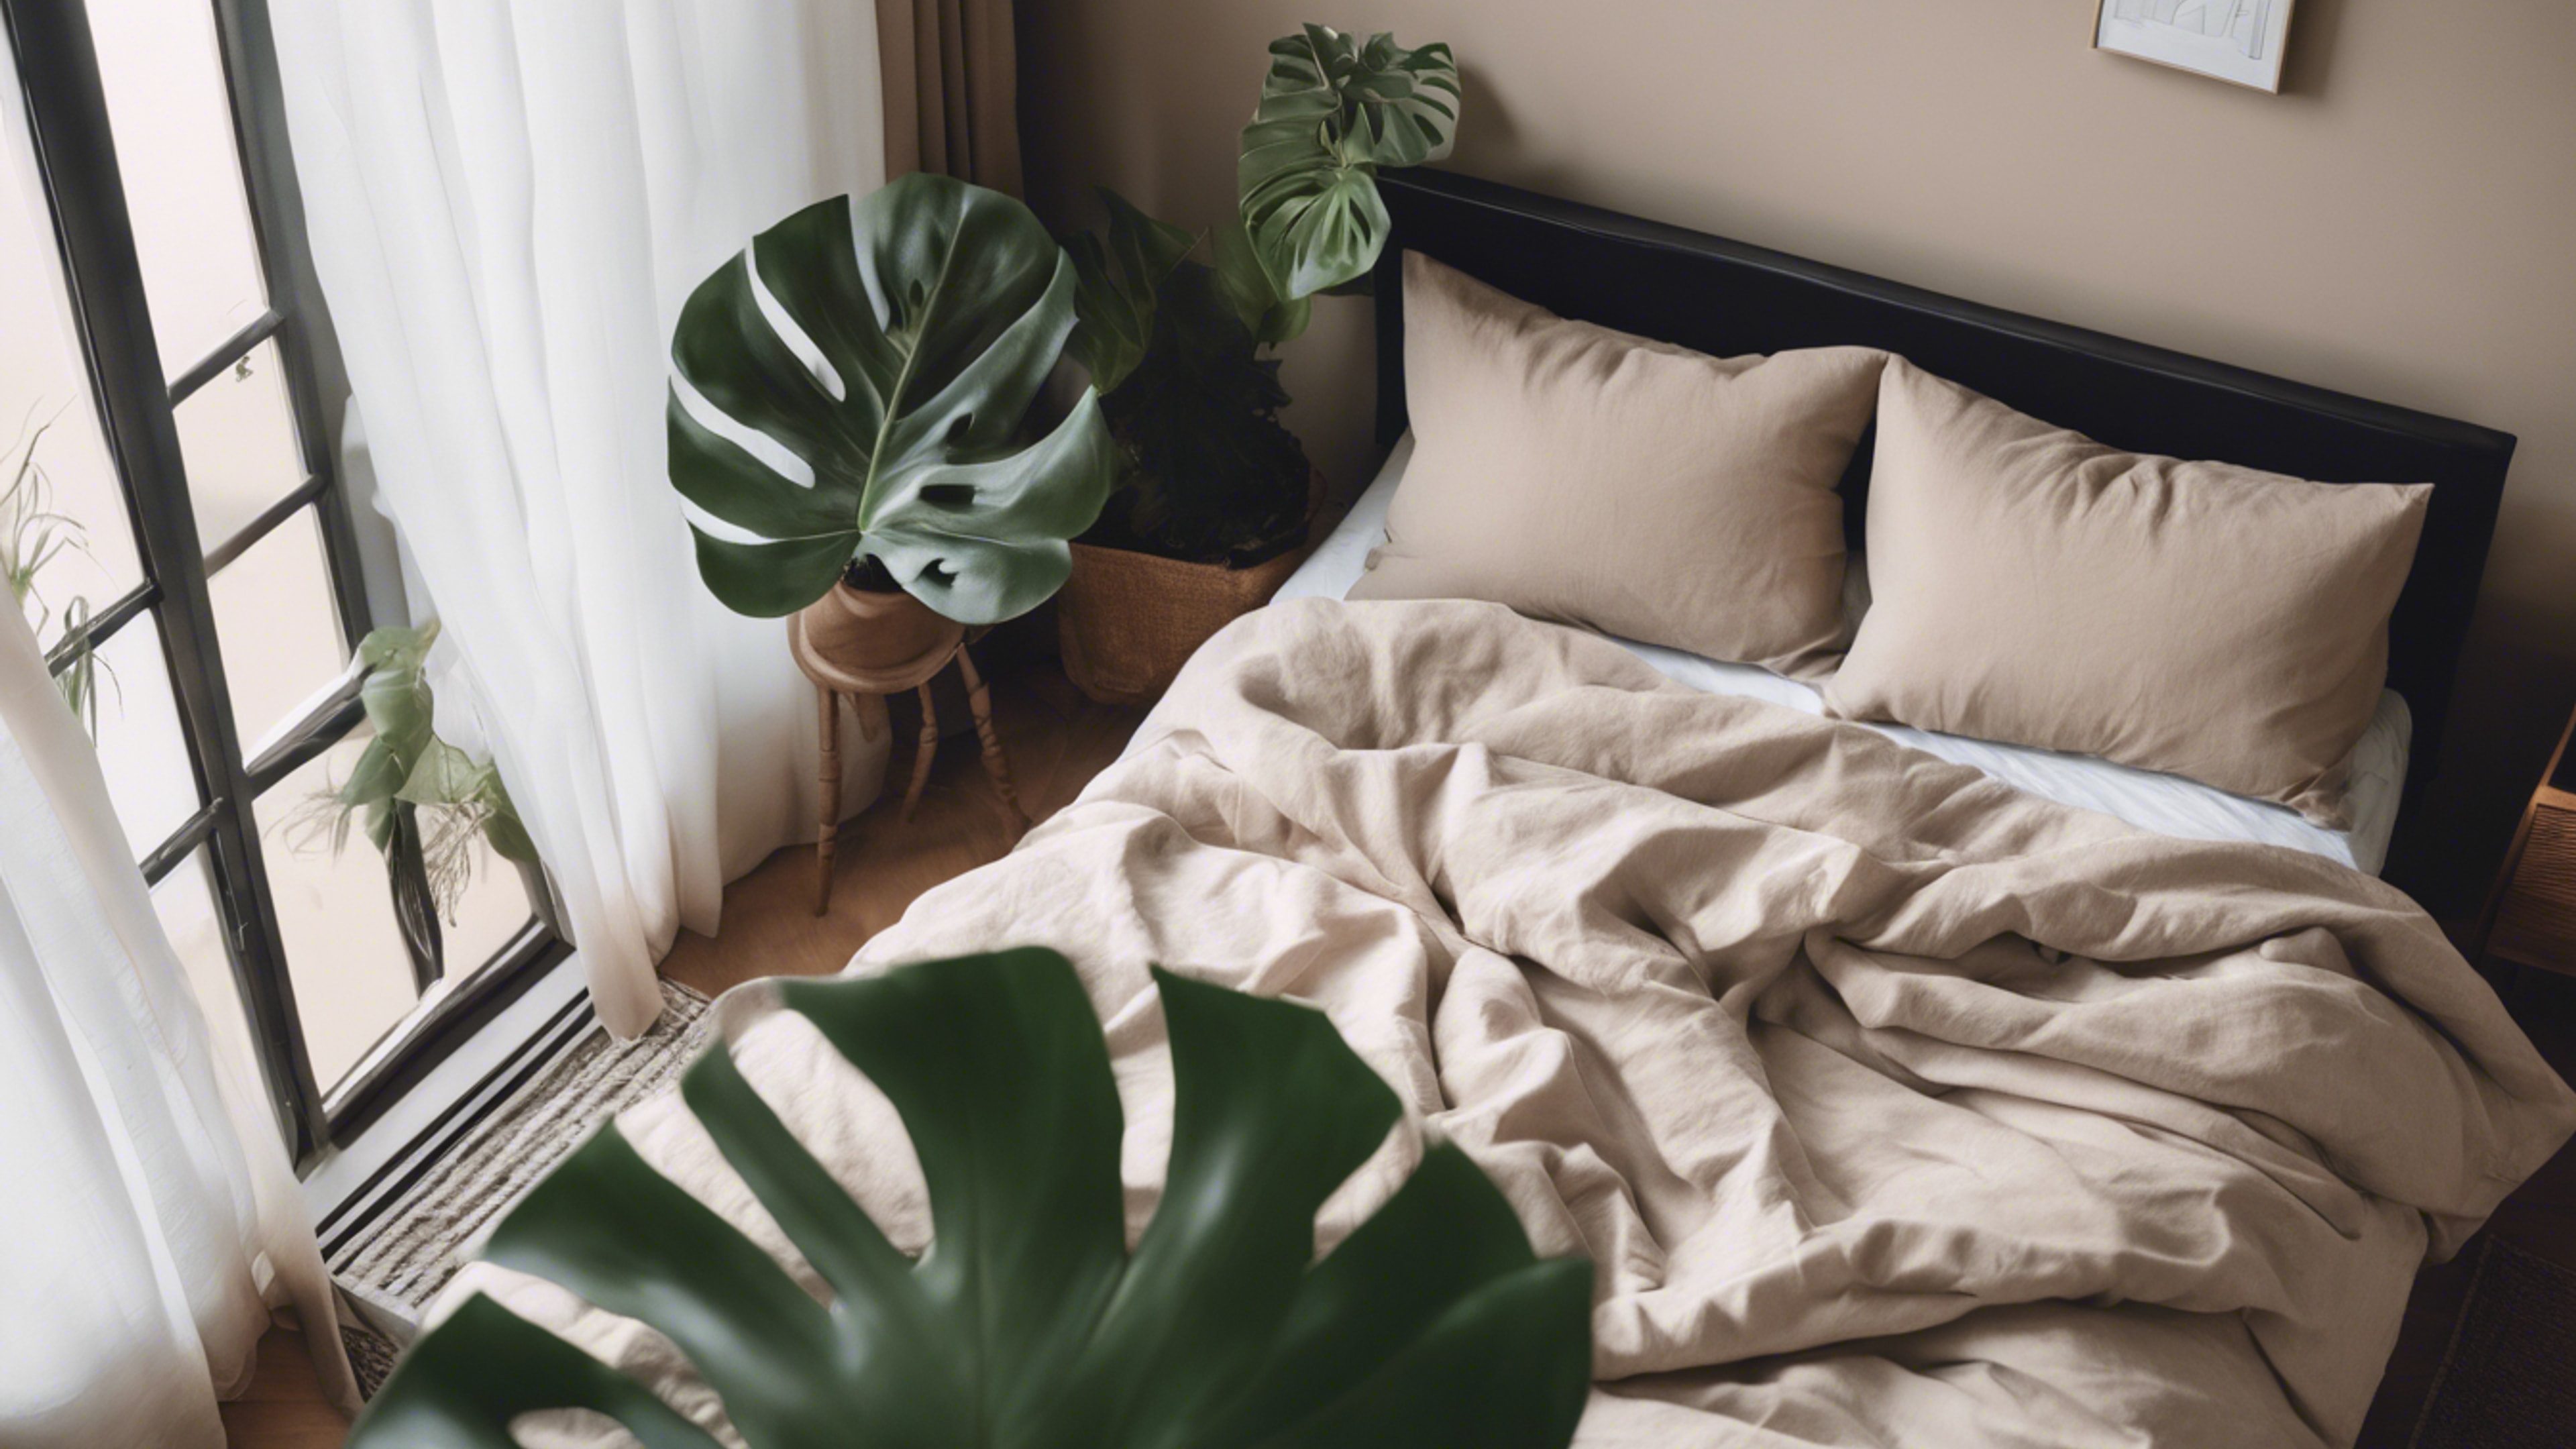 An overhead shot of a simple, cozy bedroom decorated with neutral linens and a single indoor monstera plant. Kertas dinding[3343a08d4a5644ae8972]